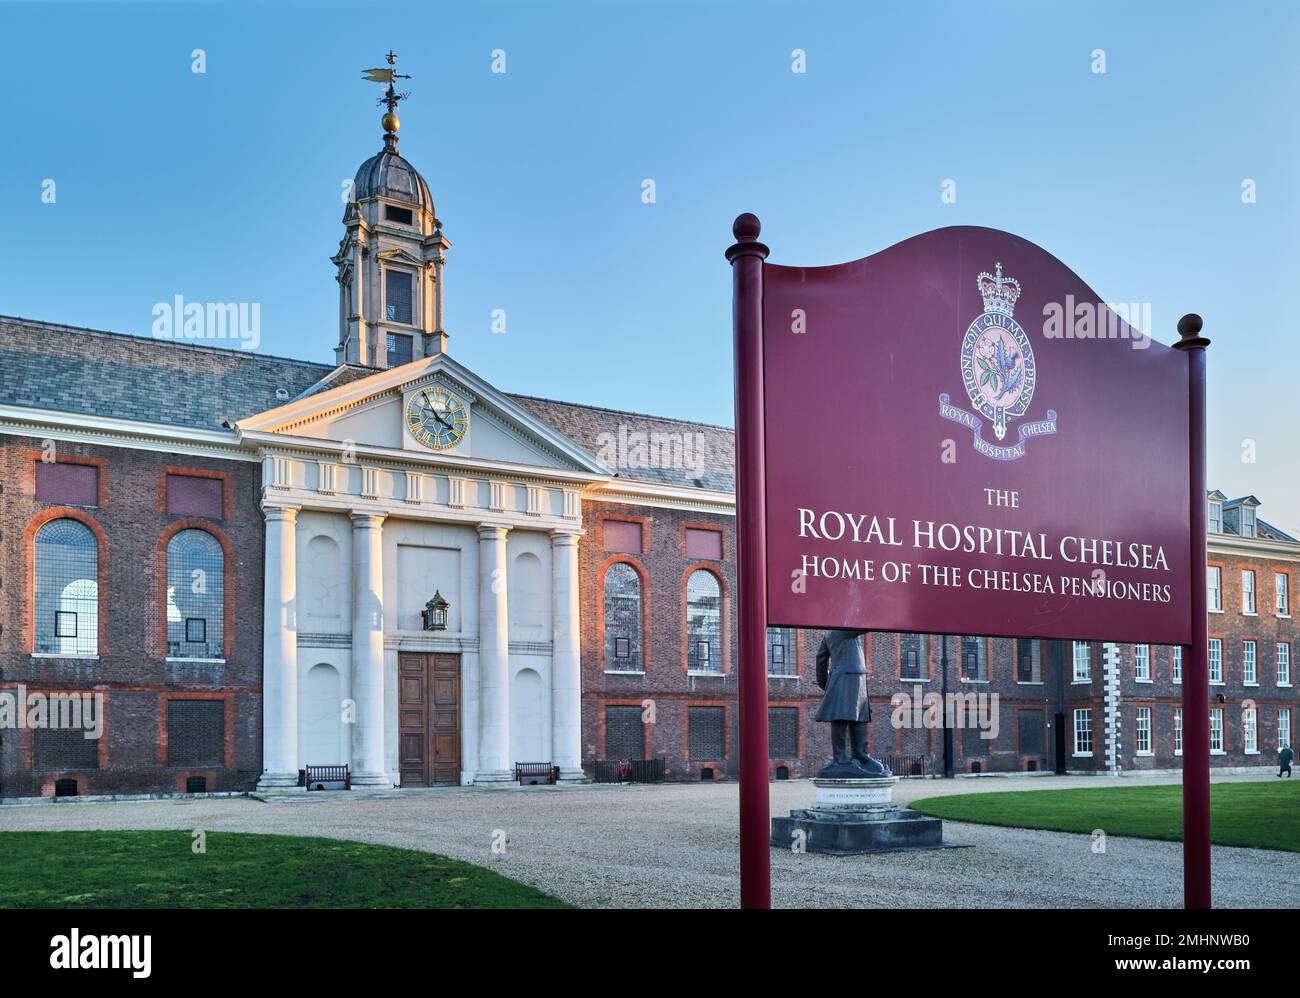 Main entrance to Royal Chelsea Hospital, London, England, founded in the seventeenth century by king Charles II for retired military pensioners. Stock Photo